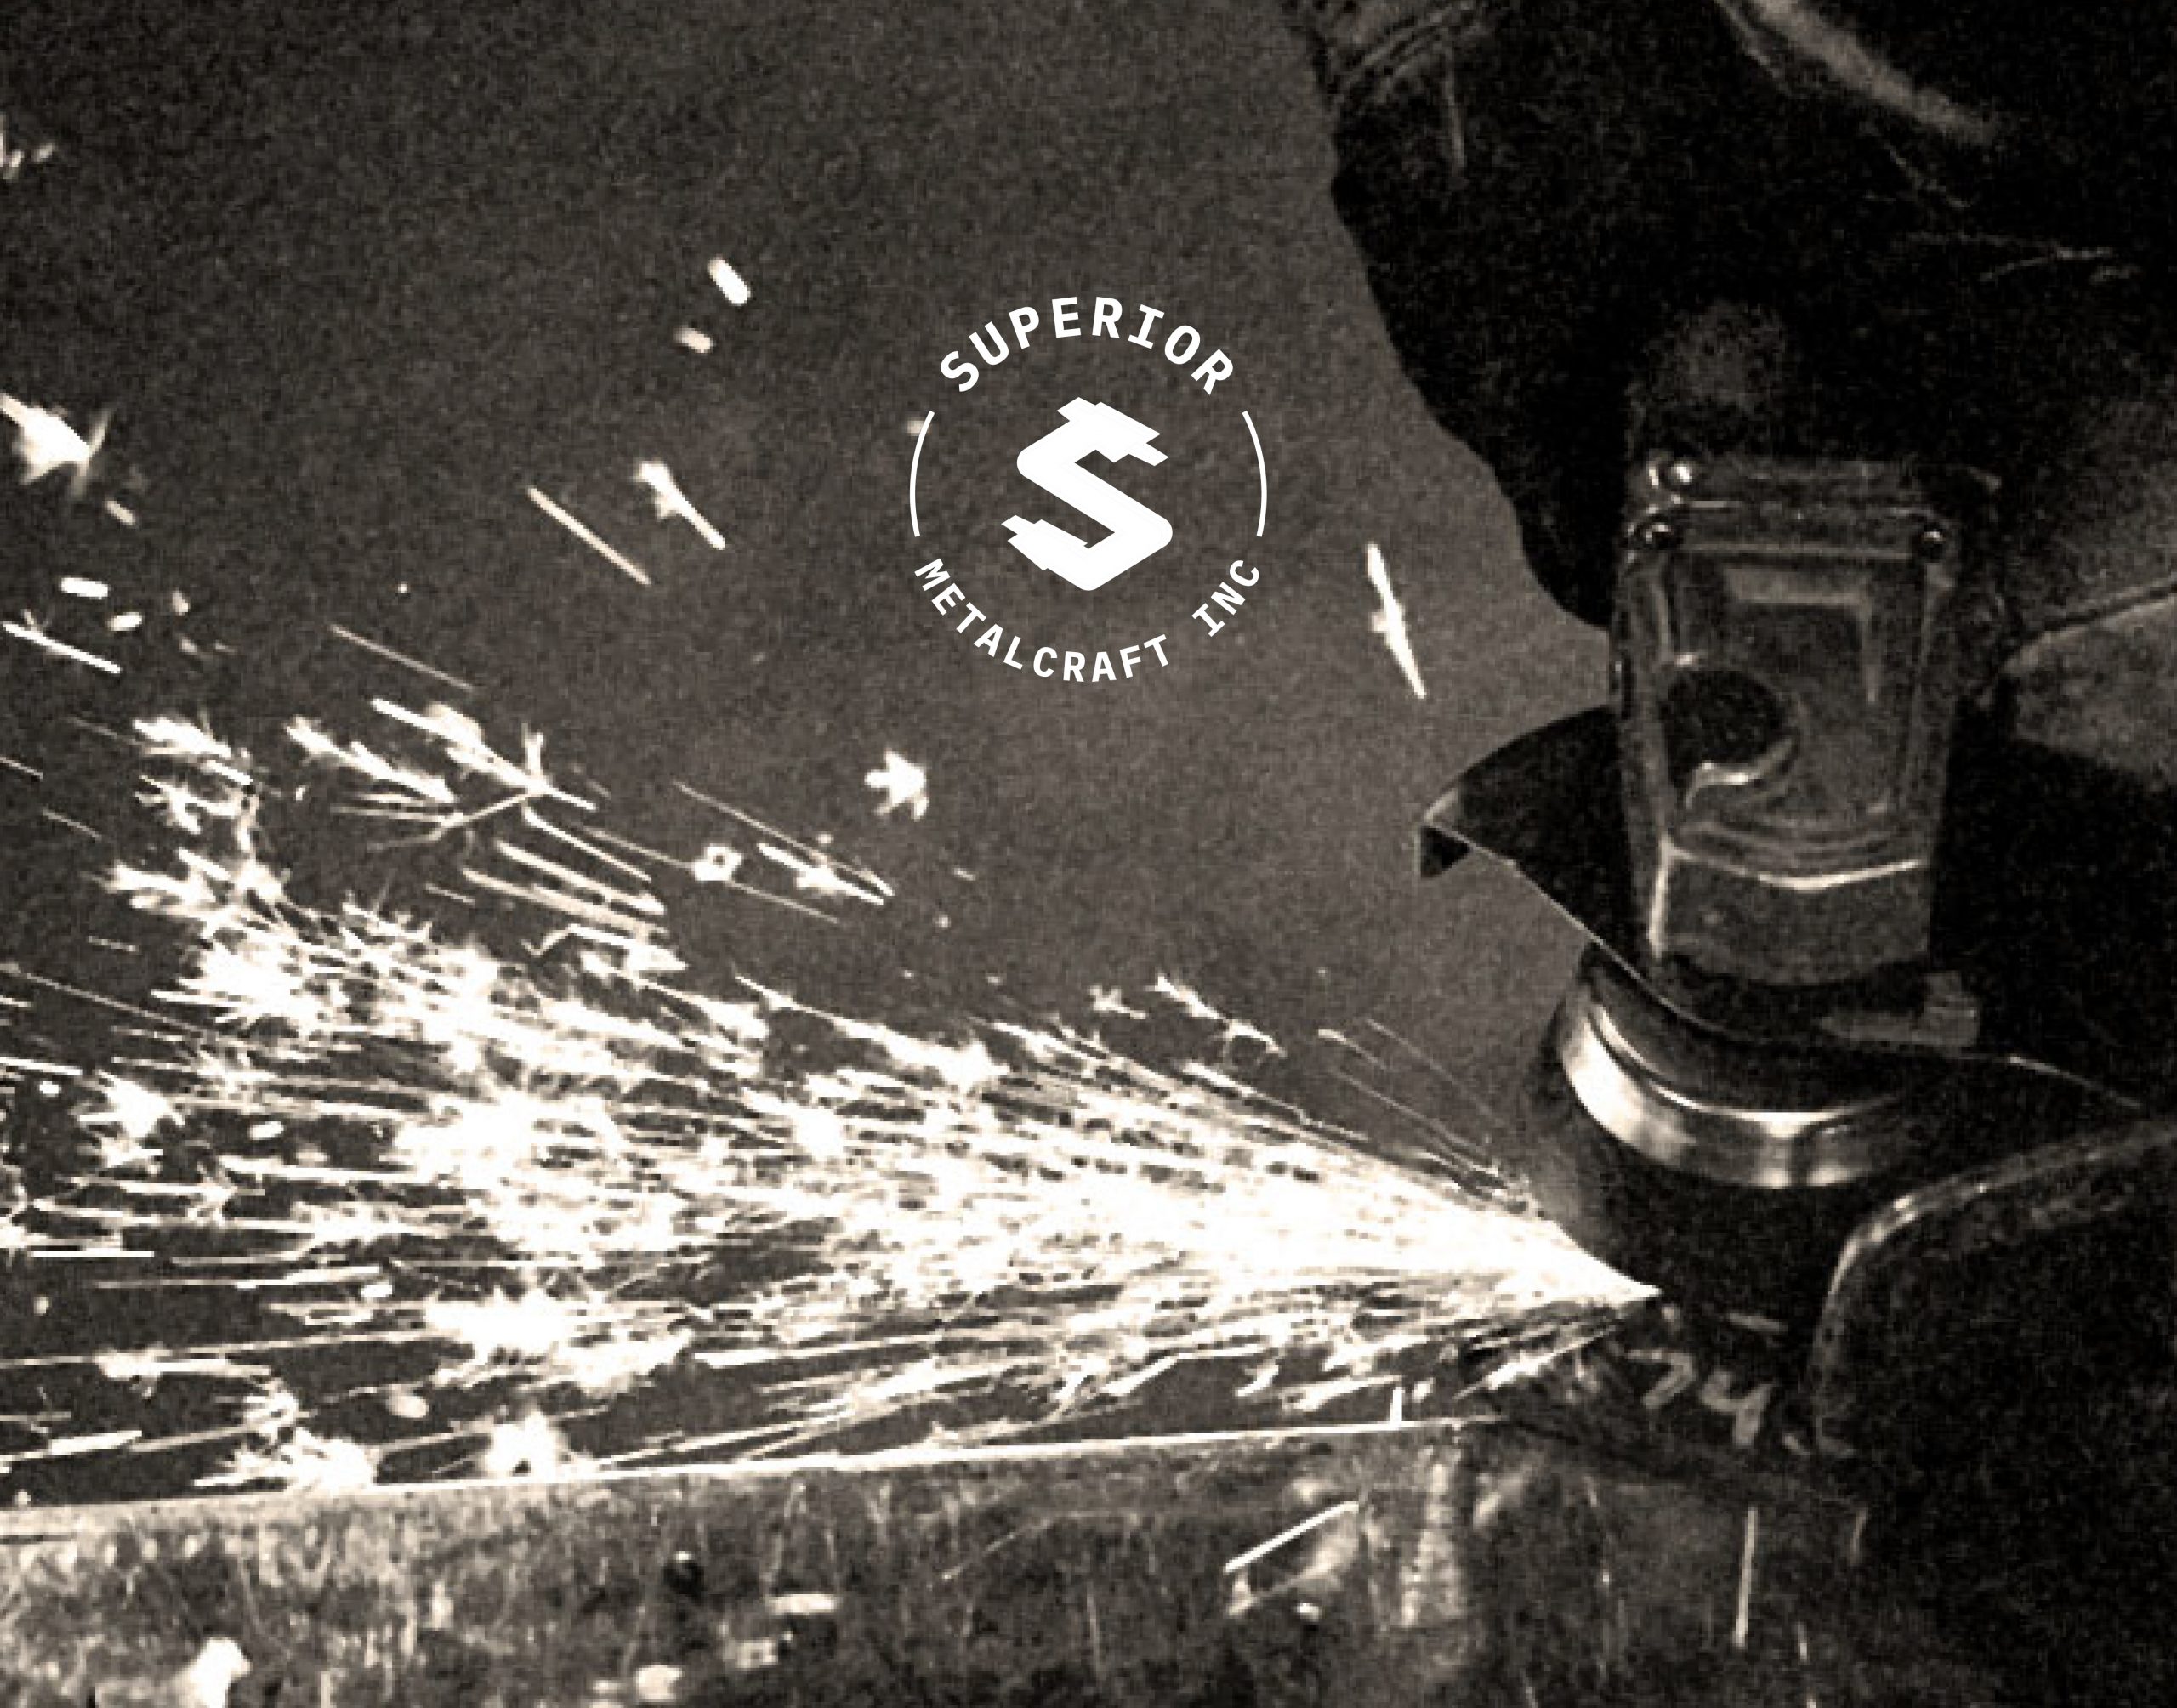 sparks appearing from the metal grinding machine with a logo of their brand